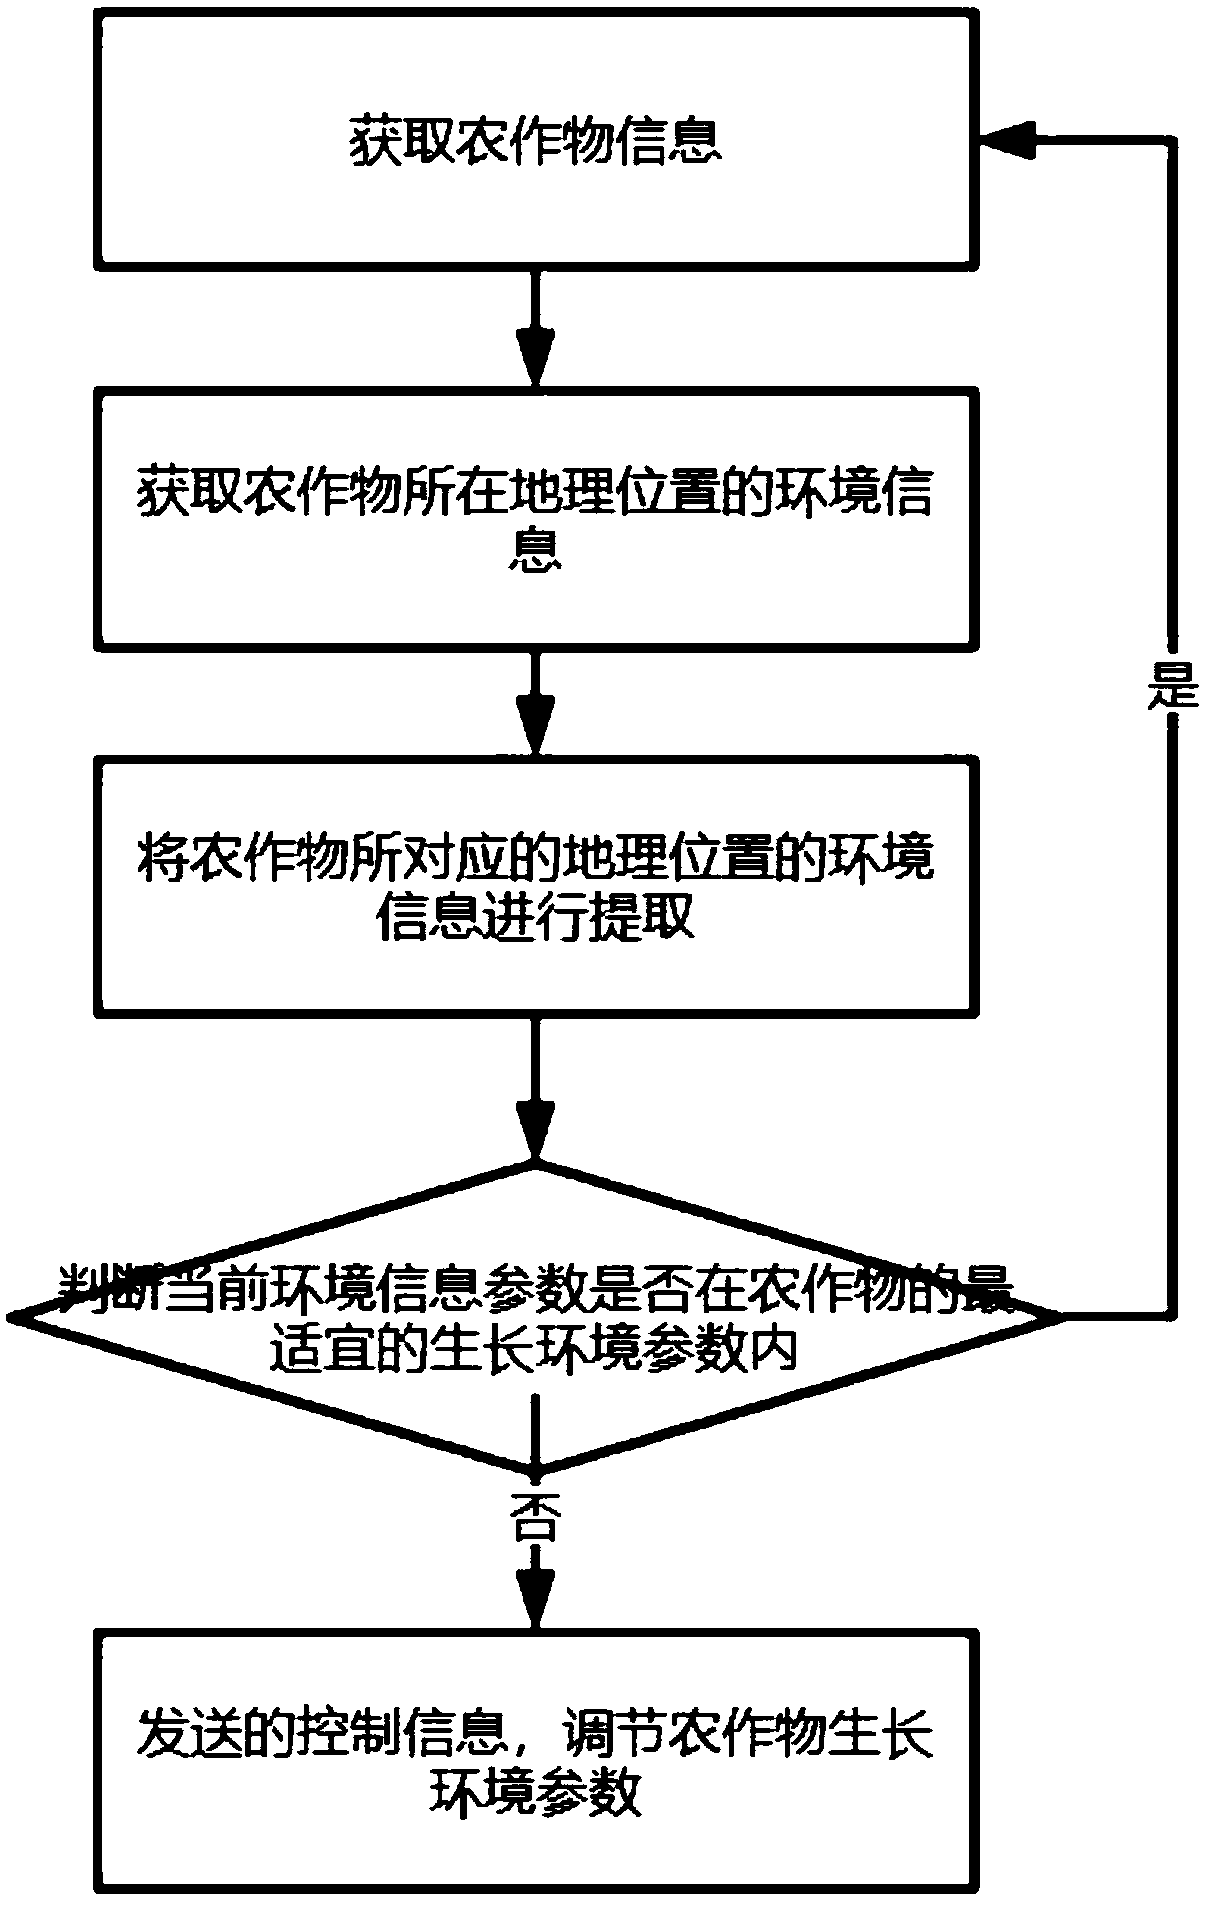 Agricultural management system and method